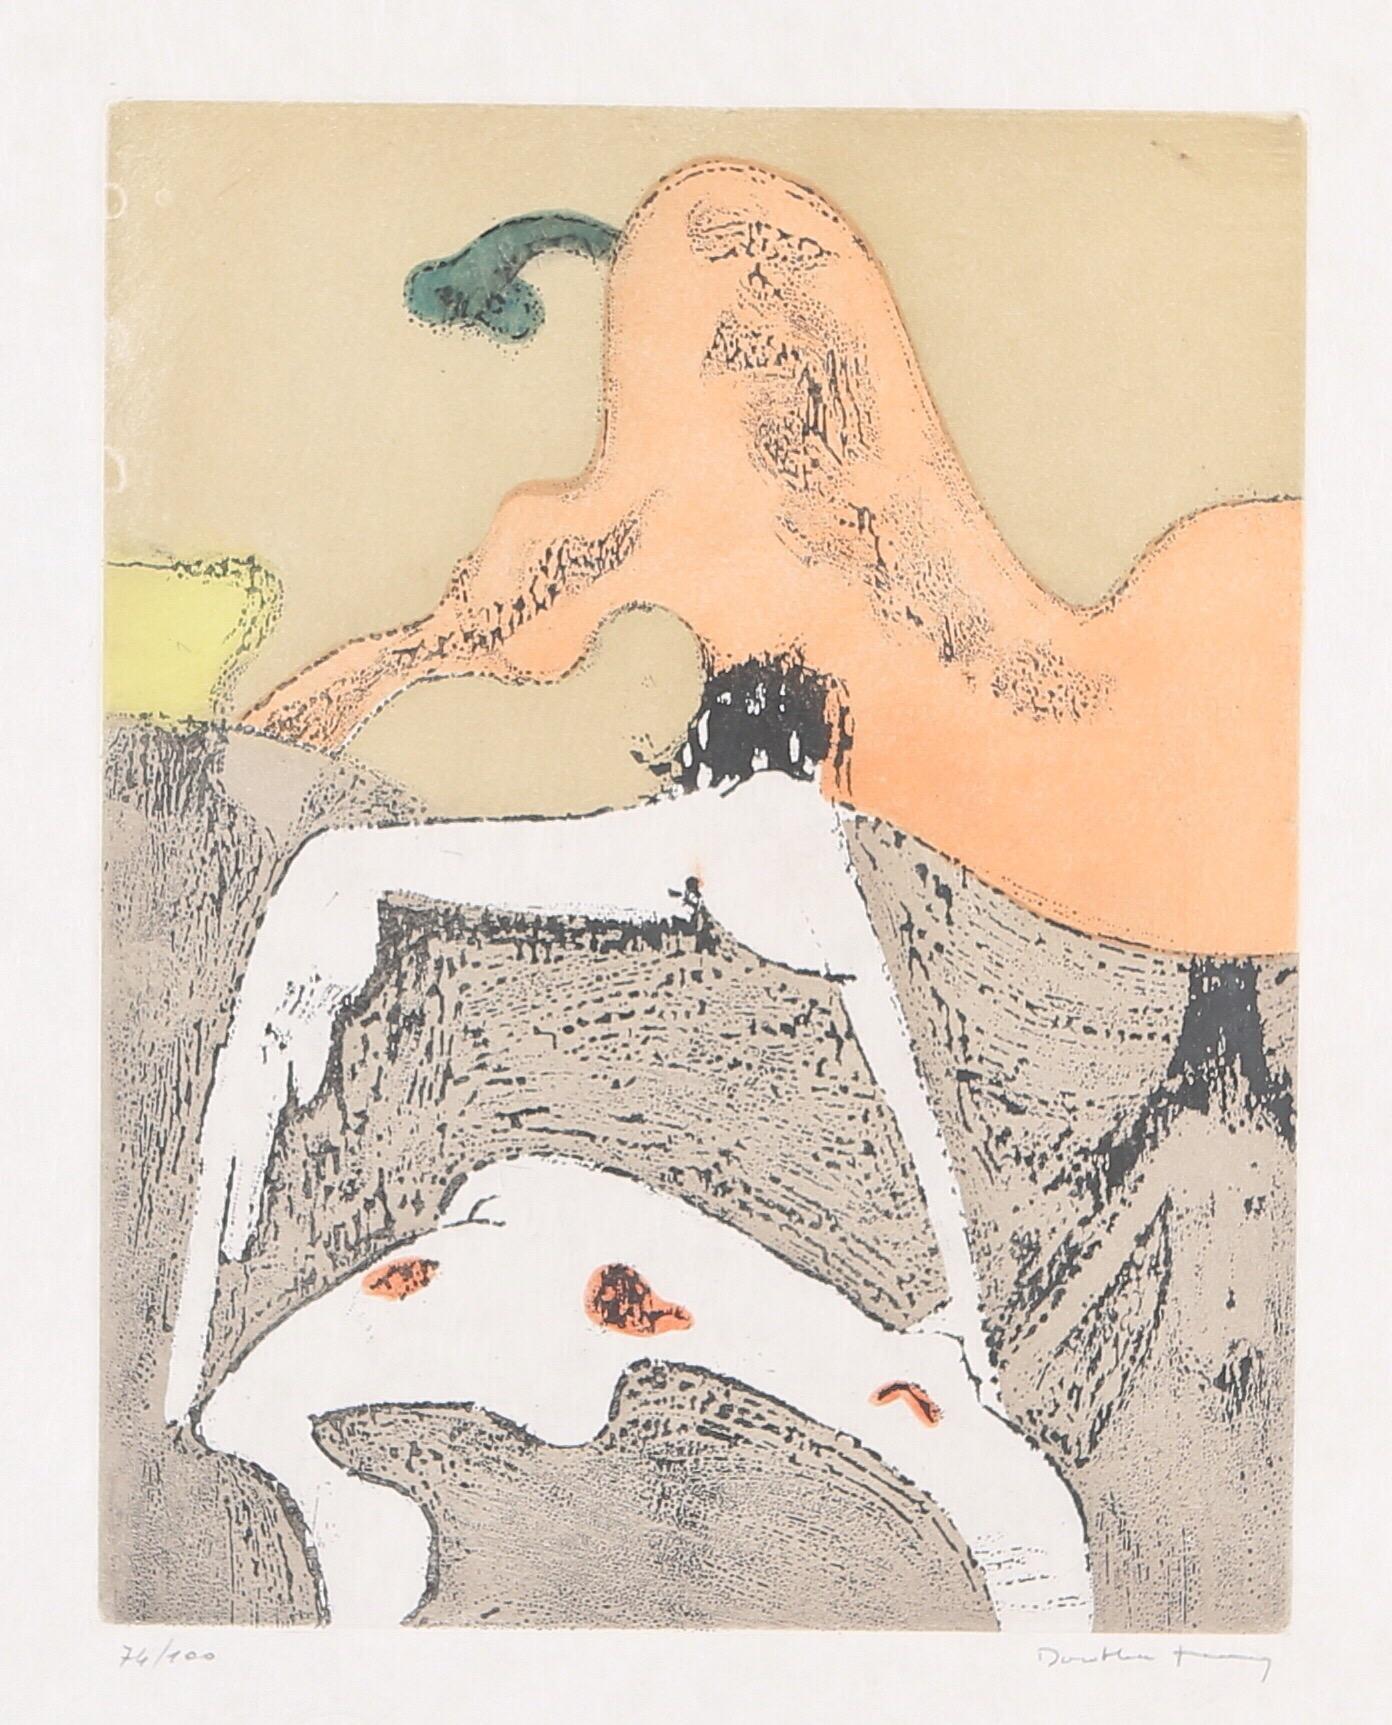 Aquatint and sugar-lift dating to 1973.
Edition 74/100 signed in pencil.
One of ten etchings accompanied by ten short poems for the artist's book En chair et en or (In flesh and gold). Éditions Georges Visat, Paris
She was the married to Max